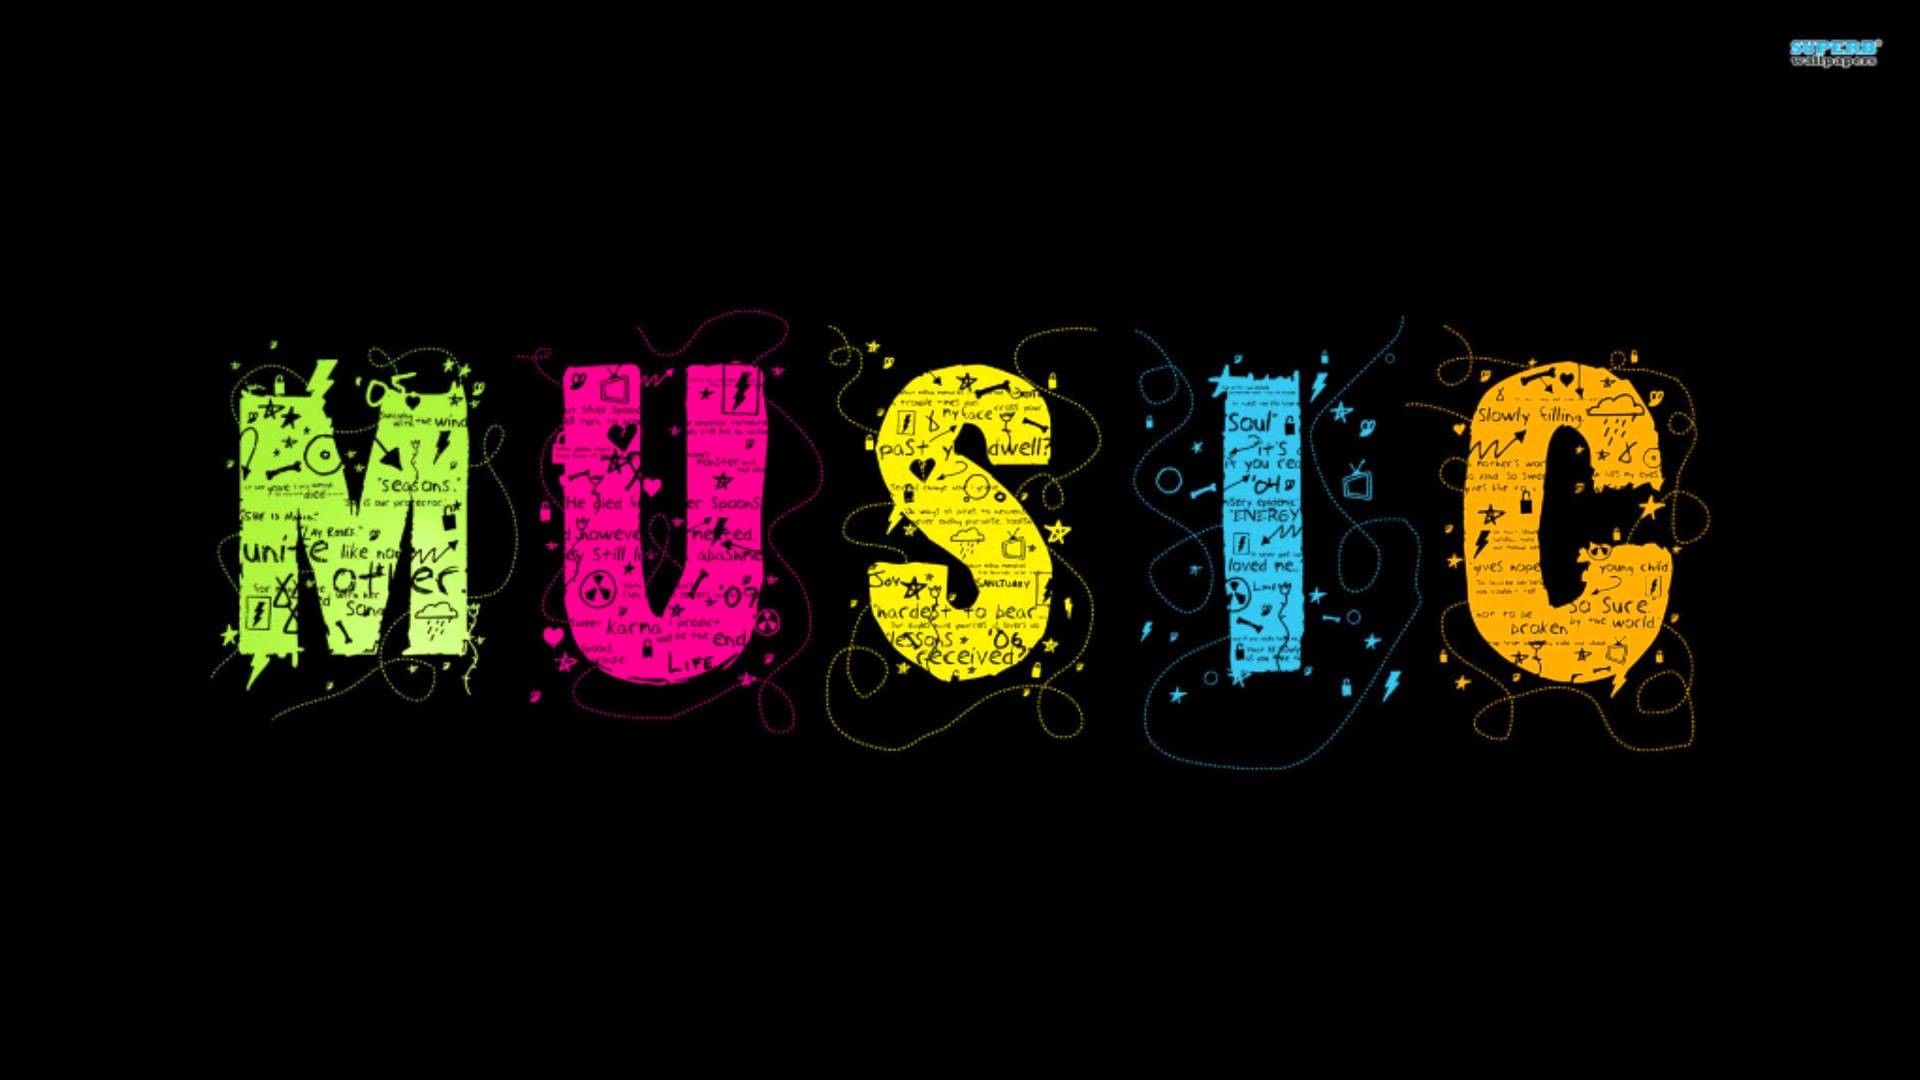 1920x1080 Download Free Music Wallpapers pictures in high definition or .